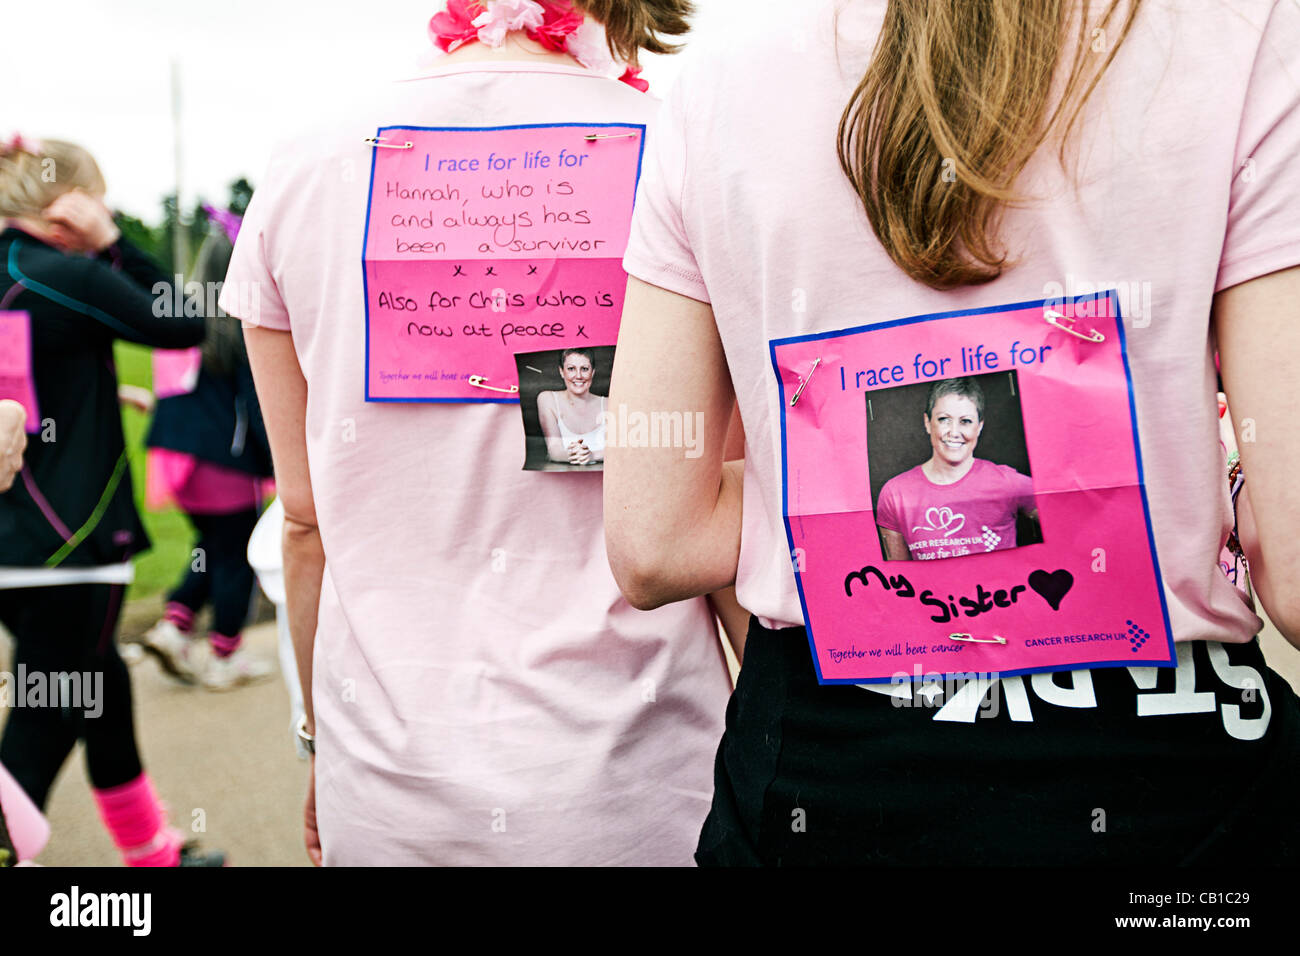 'I race for life for' cards on the backs of two participants at the Cancer Research Race for Life in Norwich Showground, Norwich, Norfolk, UK on 19 May 2012 Stock Photo